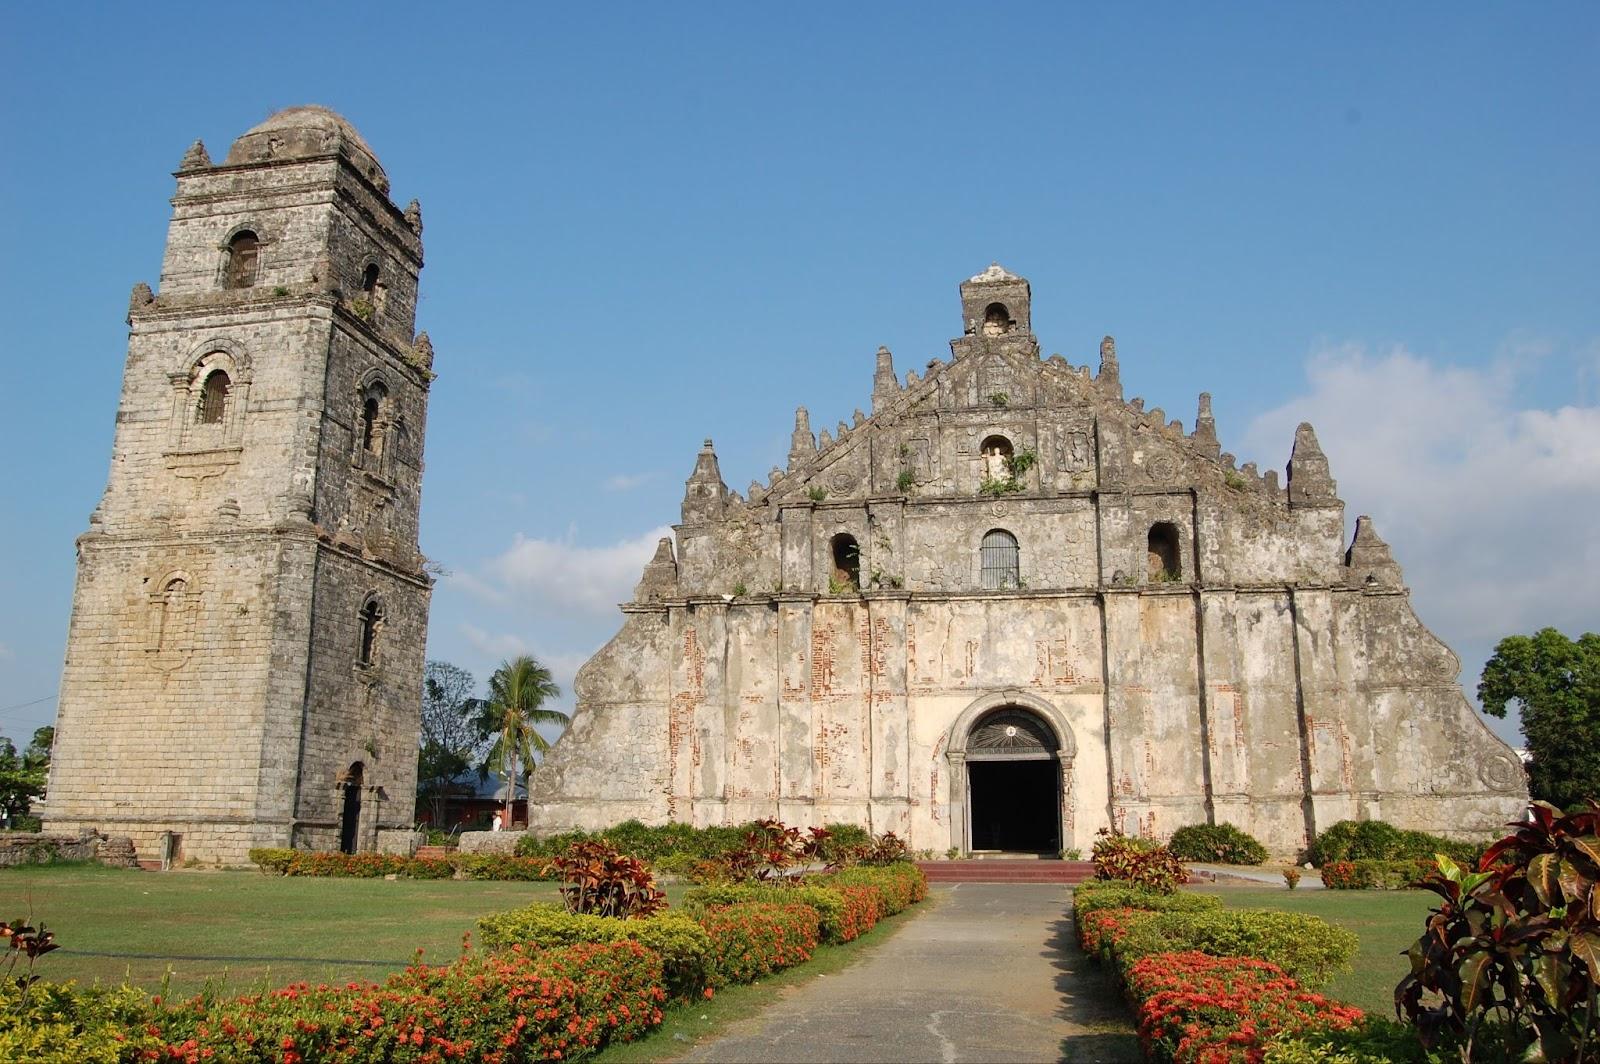 paoay church in paoay, ilocos norte, phillipines